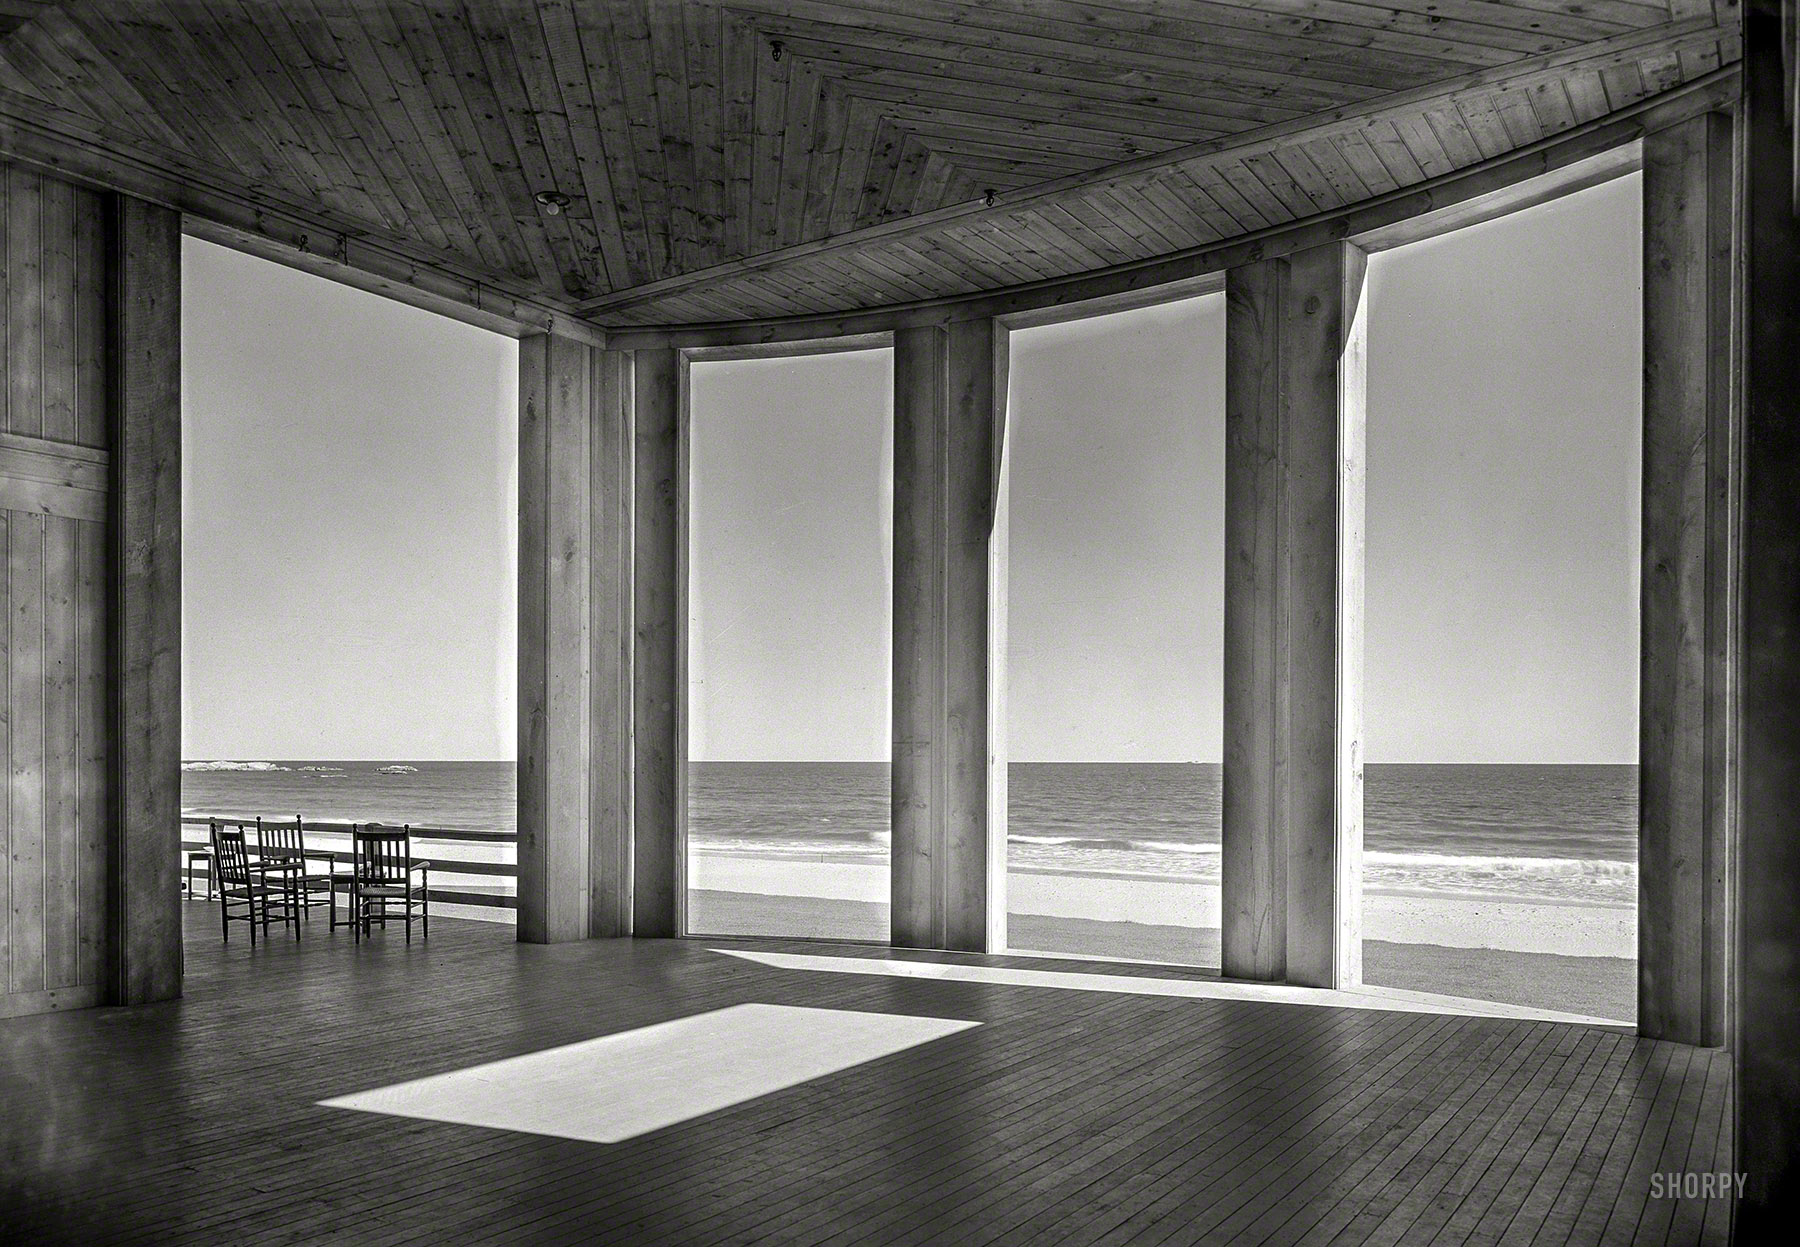 Sept. 20, 1939. The pacific side of the Atlantic: "Dunes Club, Narragansett, Rhode Island. Ocean portico looking out. Purves, Cope & Stewart, architect." Large-format acetate negative by Gottscho-Schleisner. View full size.